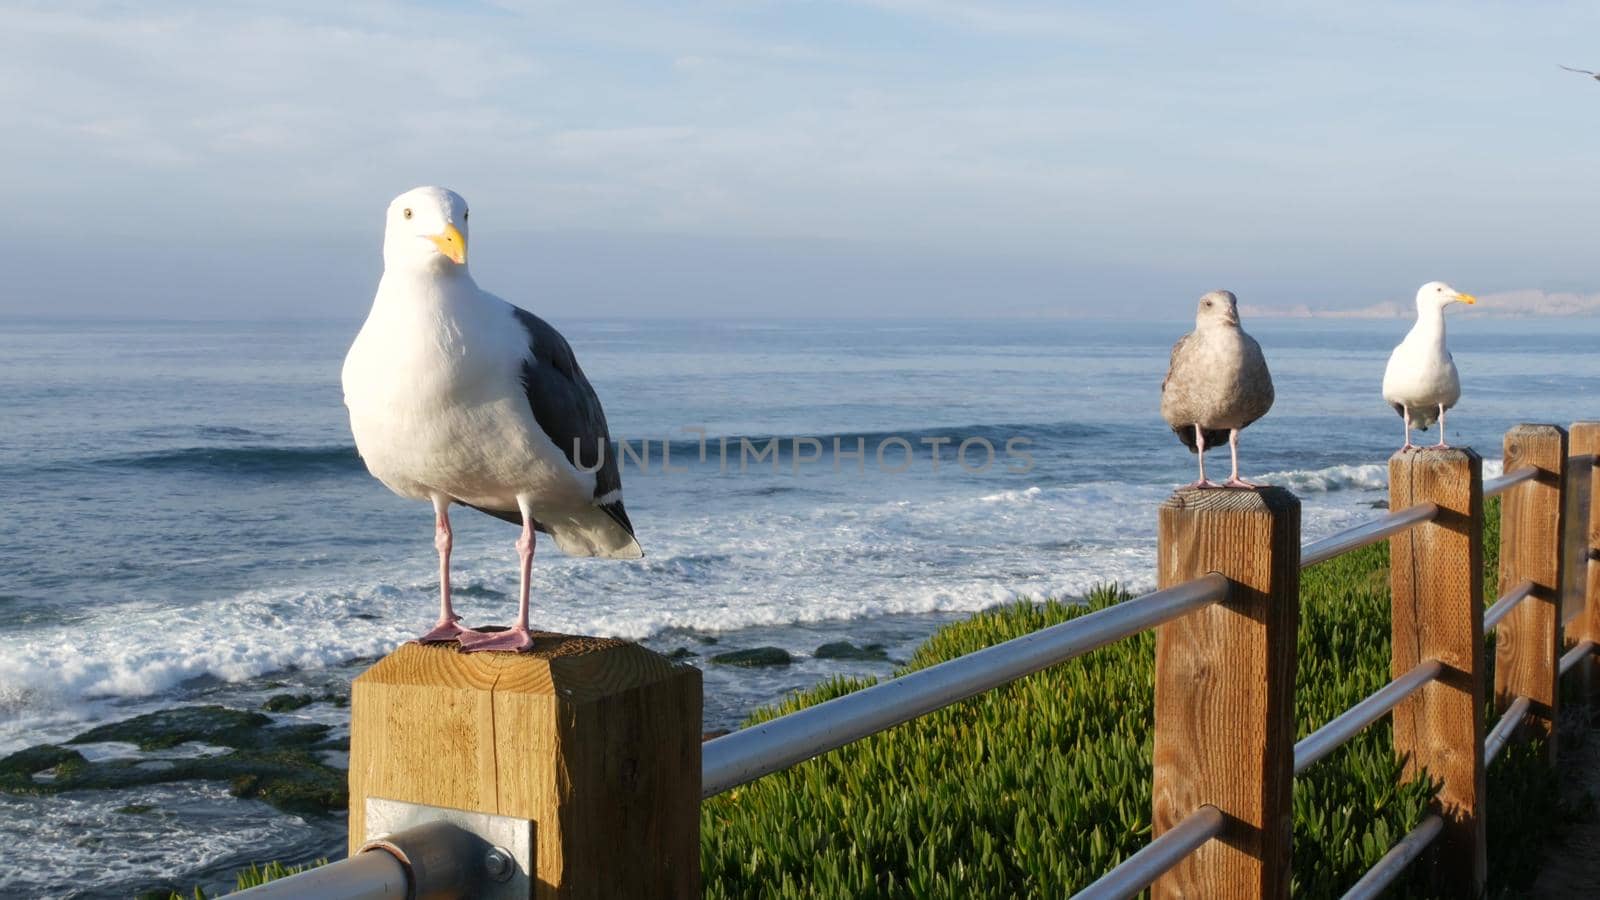 Funny sea gull birds on railings. Seagulls and green pigface sour fig succulent, pacific ocean splashing waves. Ice plant greenery on steep cliff. Vista point in La Jolla, San Diego, California USA by DogoraSun